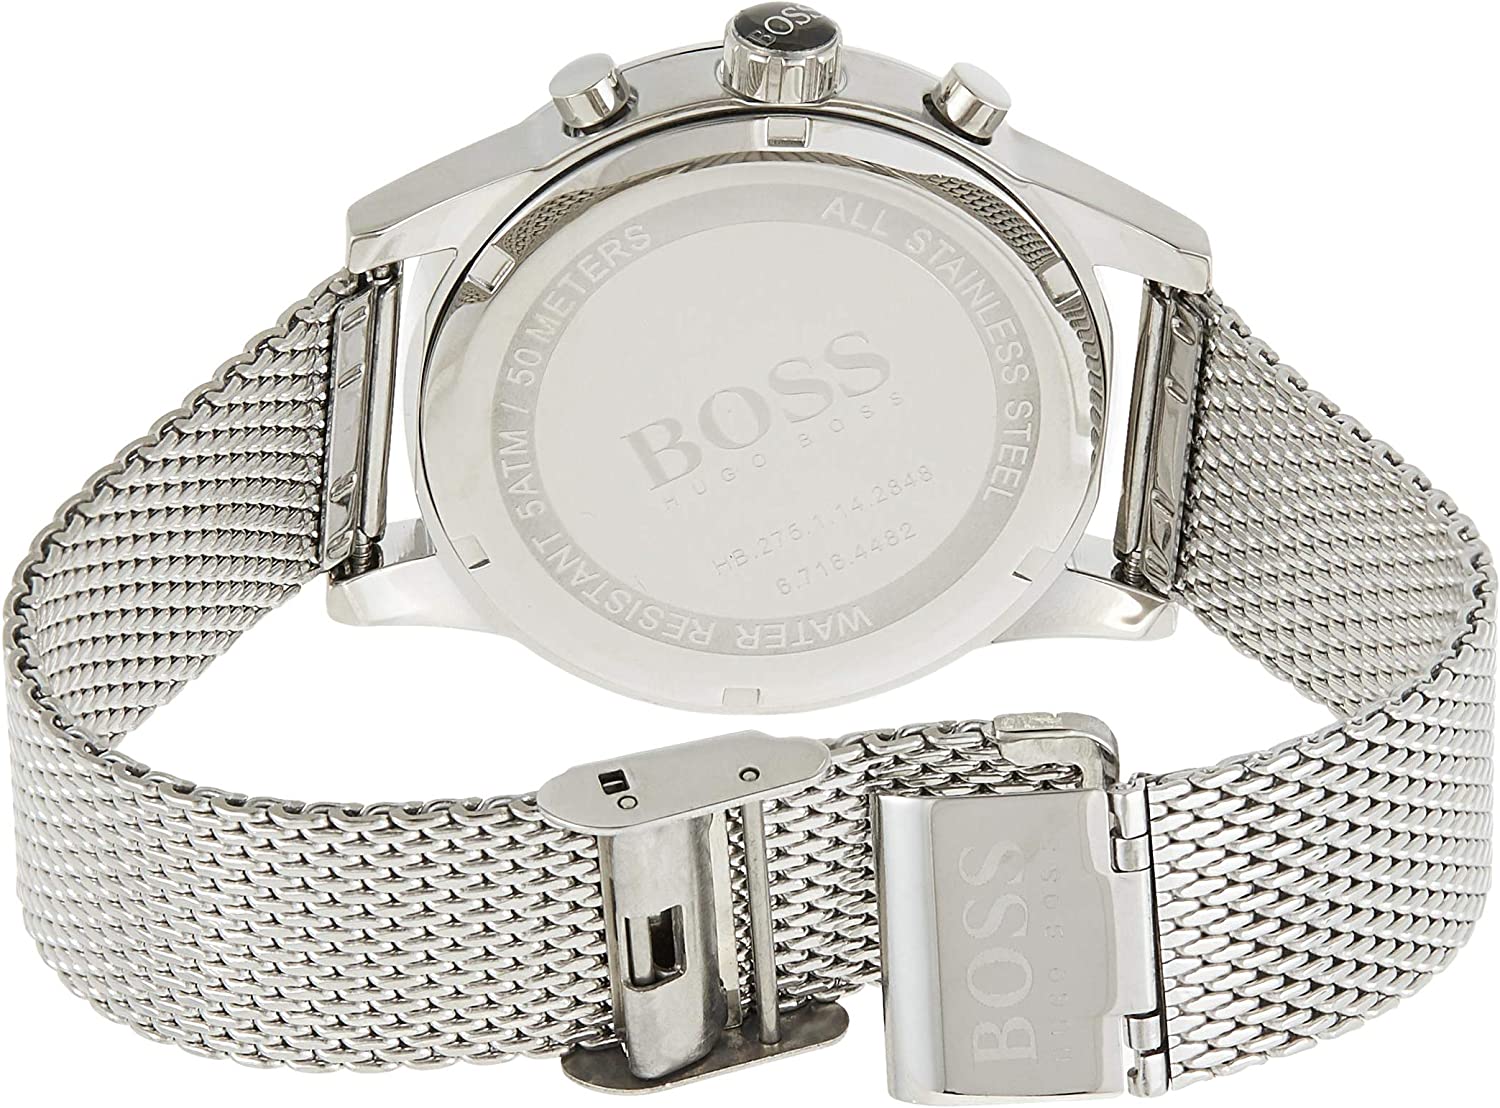 ĐỒNG HỒ ĐEO TAY NAM HUGO BOSS 1513441 MENS JET STAINLESS STEEL BLUE DIAL MESH STRAP CHRONOGRAPH WATCH 19